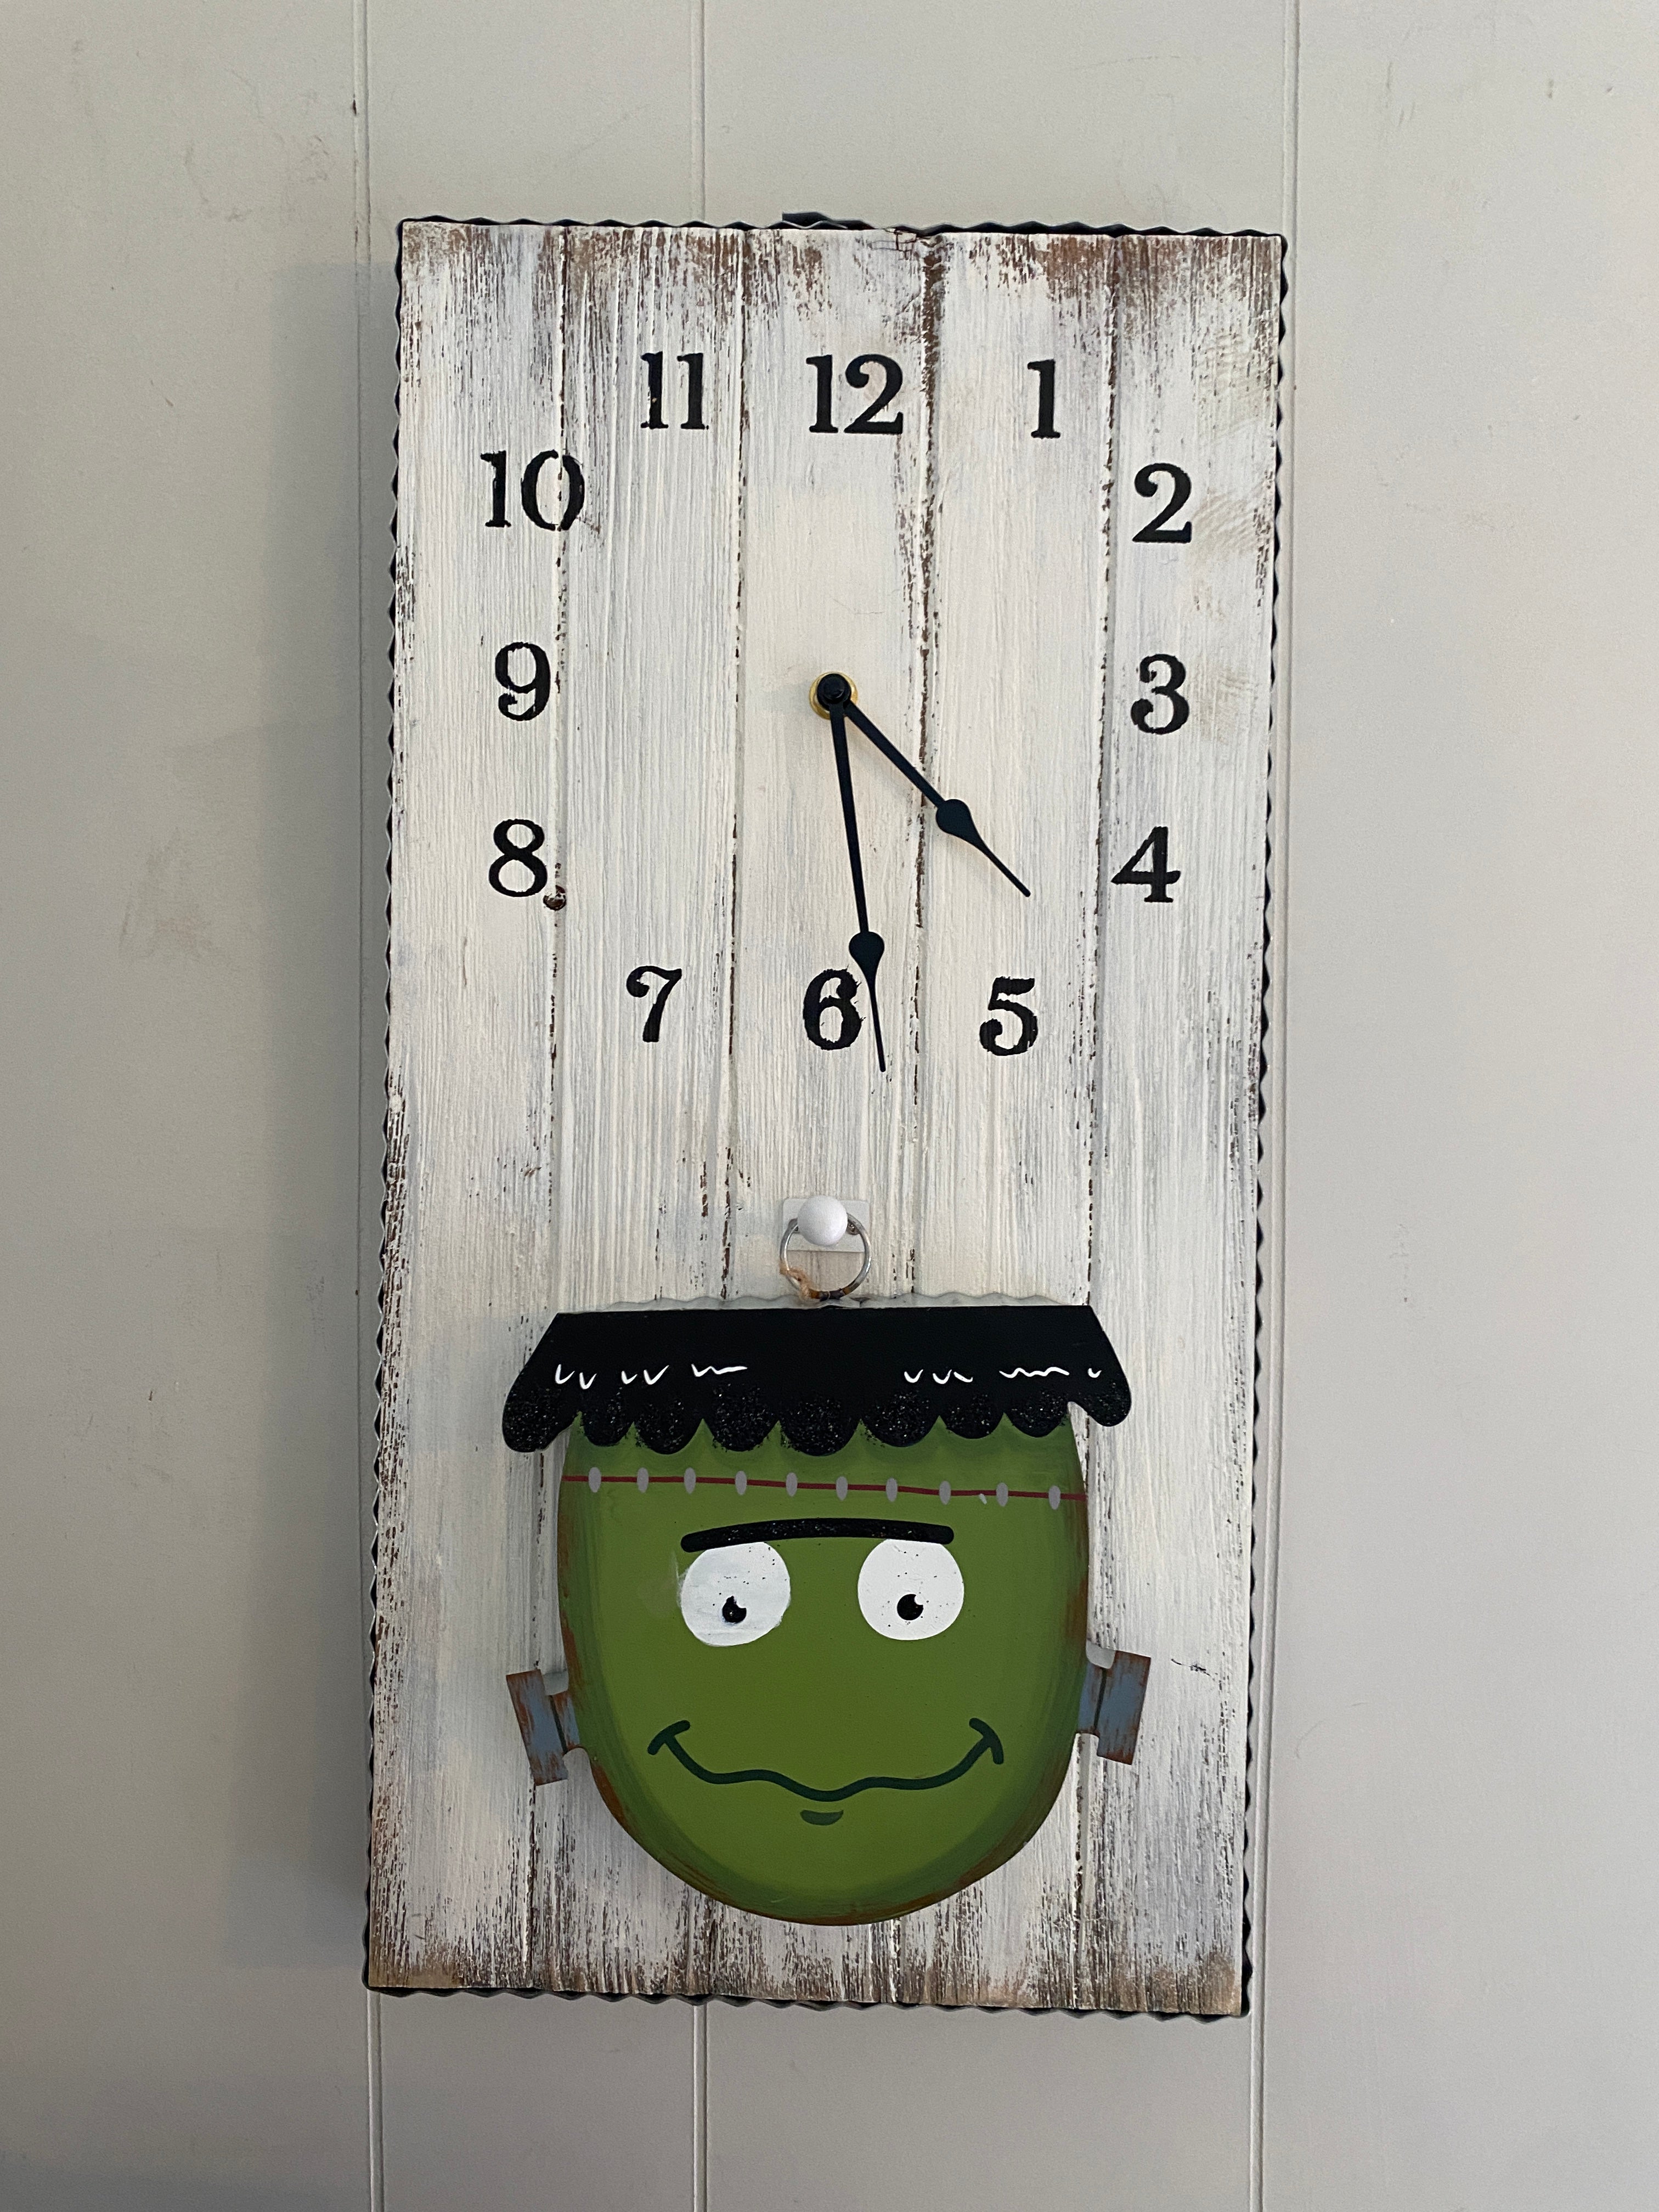 This is the perfect wall or table decoration! Not only does it keep time for you, but you can interchange different charms to decorate for the different seasons. You will love this for your home!  We have a variety of charms that will look great on this clock. Search for "Charms - Assorted Holidays, Sports & Seasons" online.